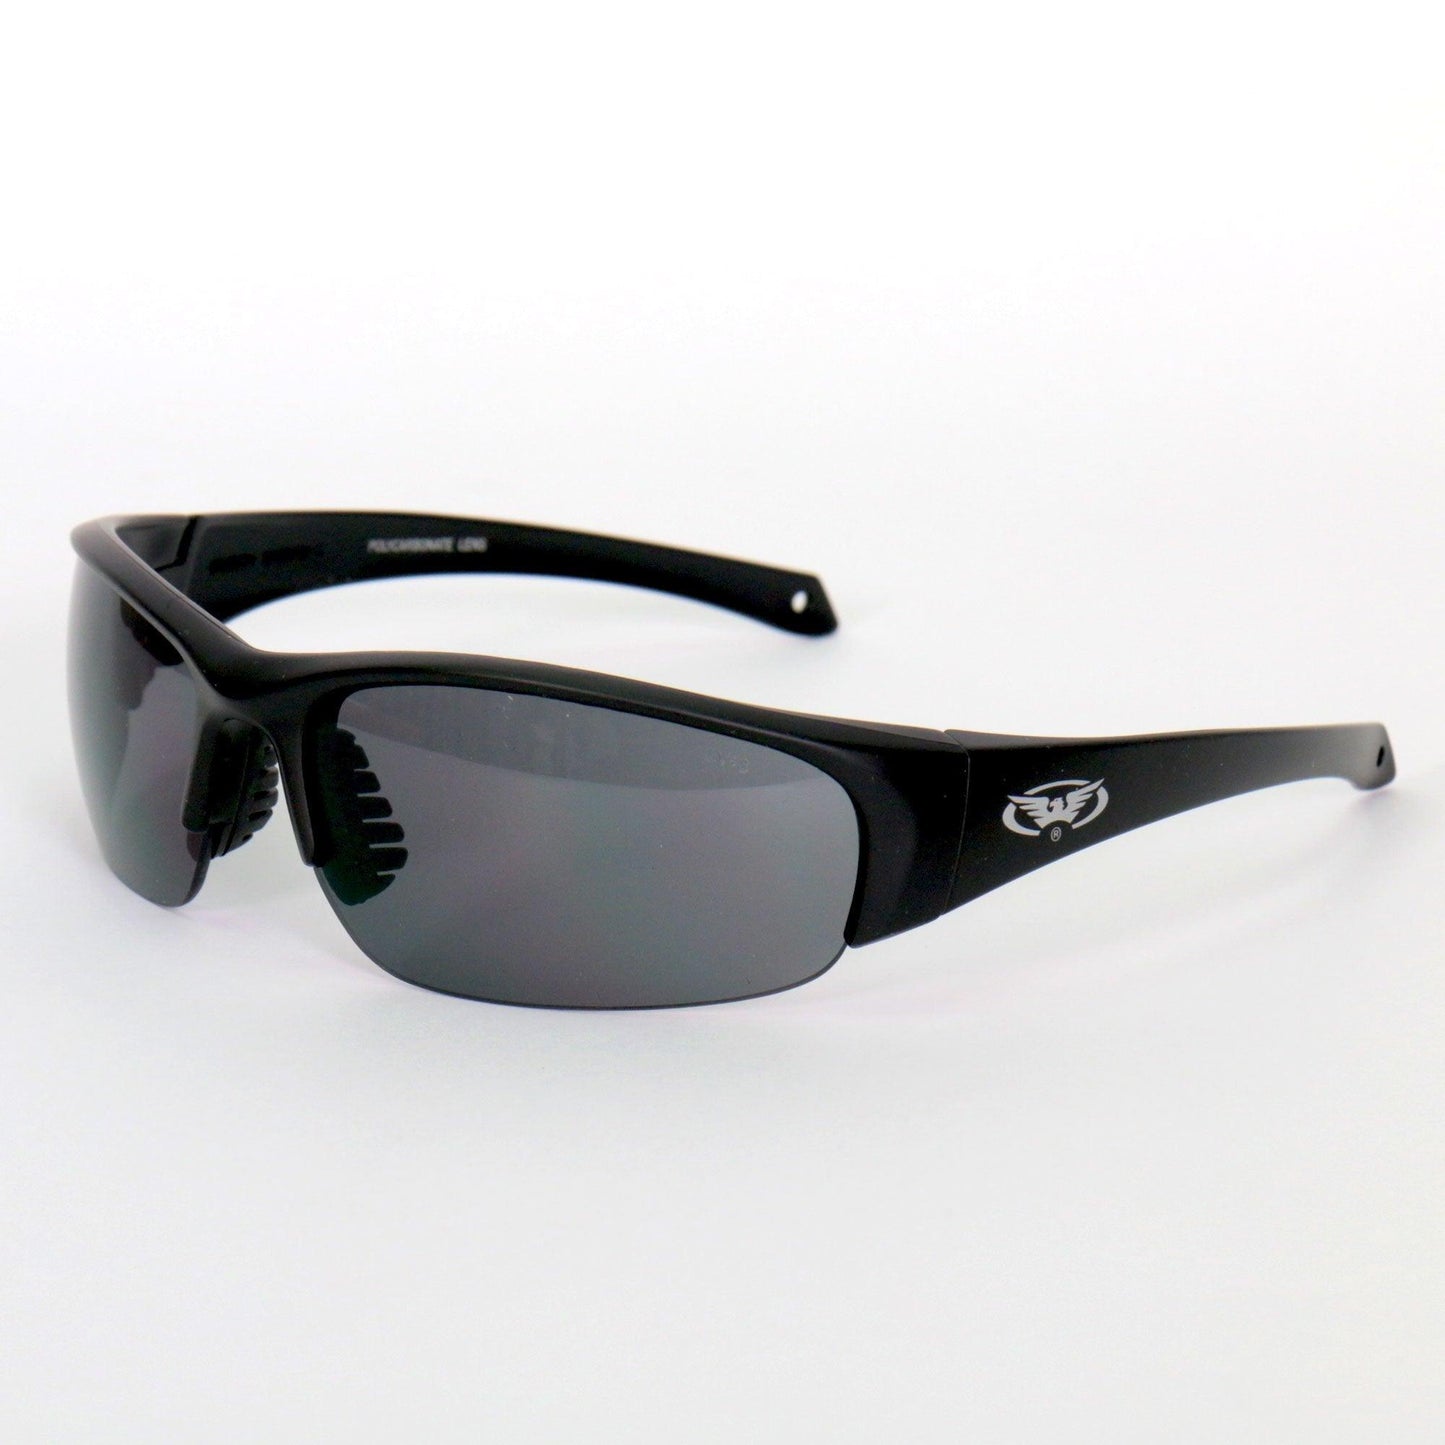 Eazy Eyes Safety Sunglasses With Smoke Mirror Lenses - Military Republic